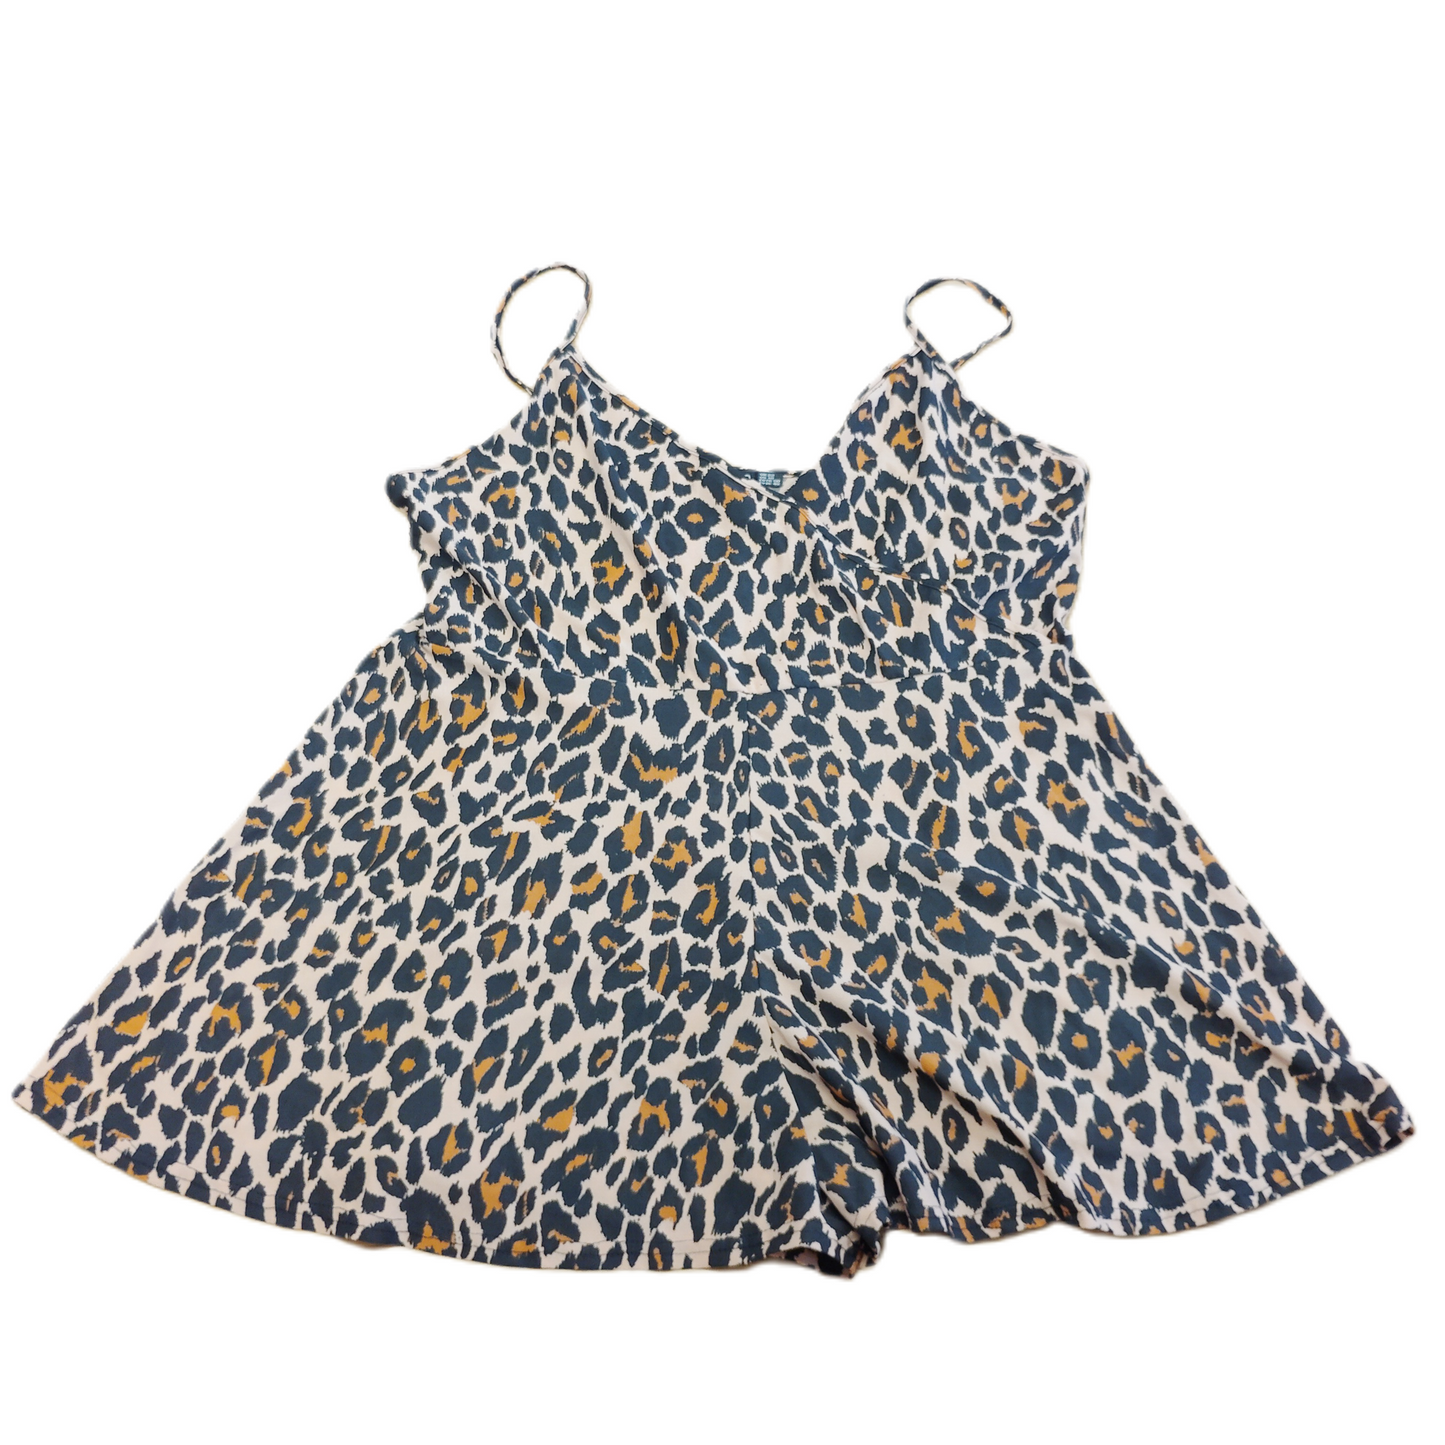 Leopard Print Romper By Boohoo Boutique, Size: 1x